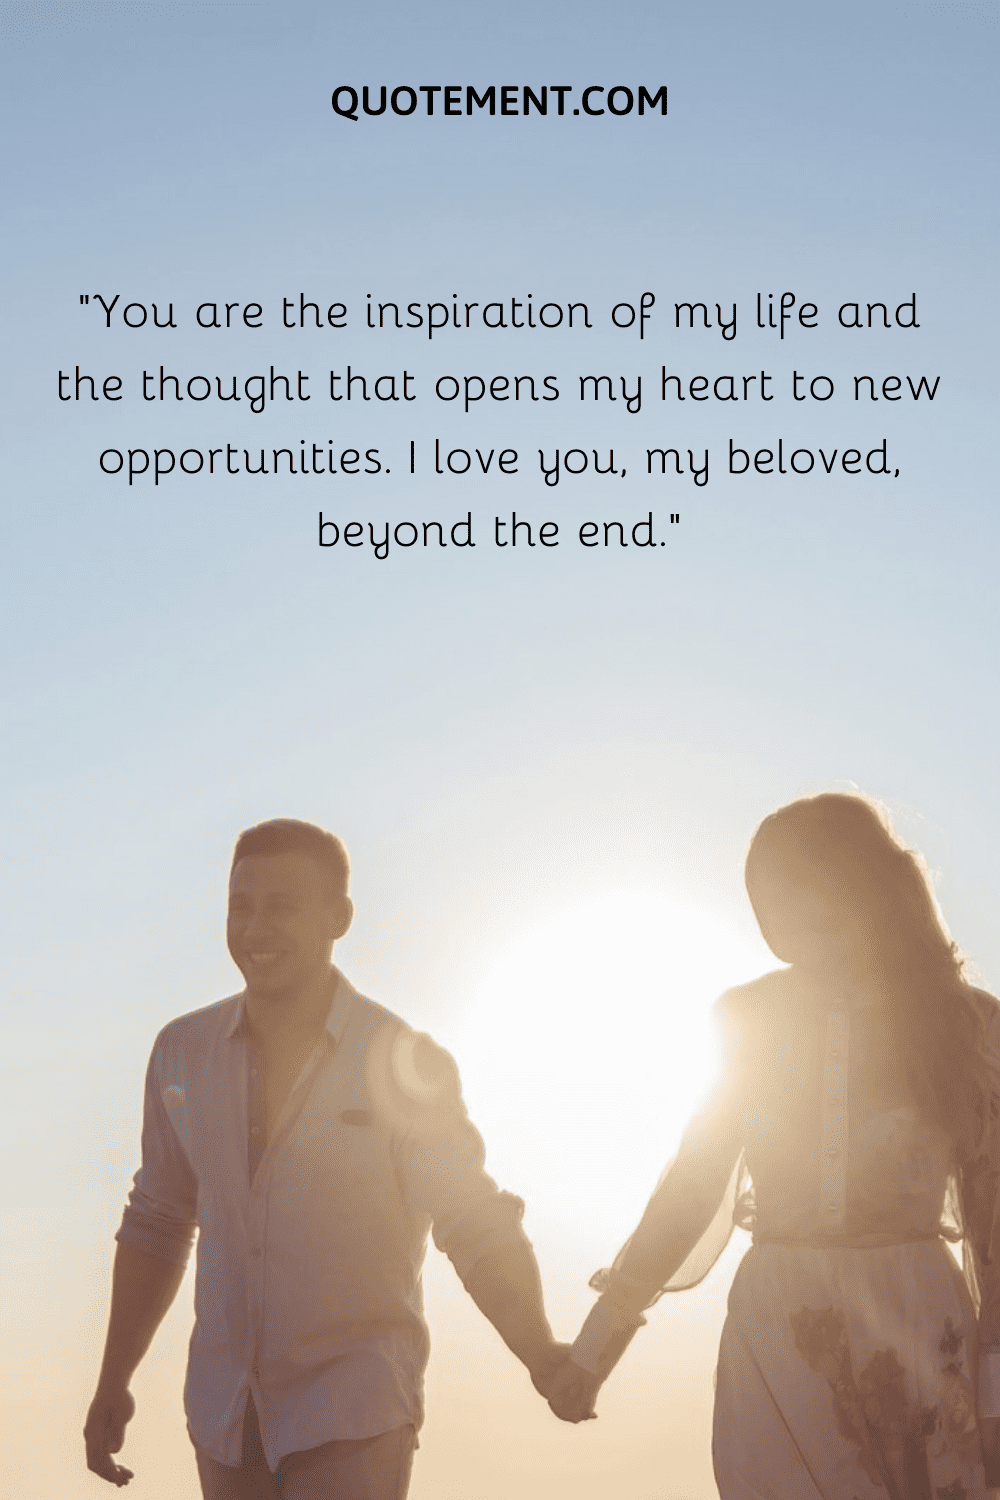 “You are the inspiration of my life and the thought that opens my heart to new opportunities. I love you, my beloved, beyond the end.”